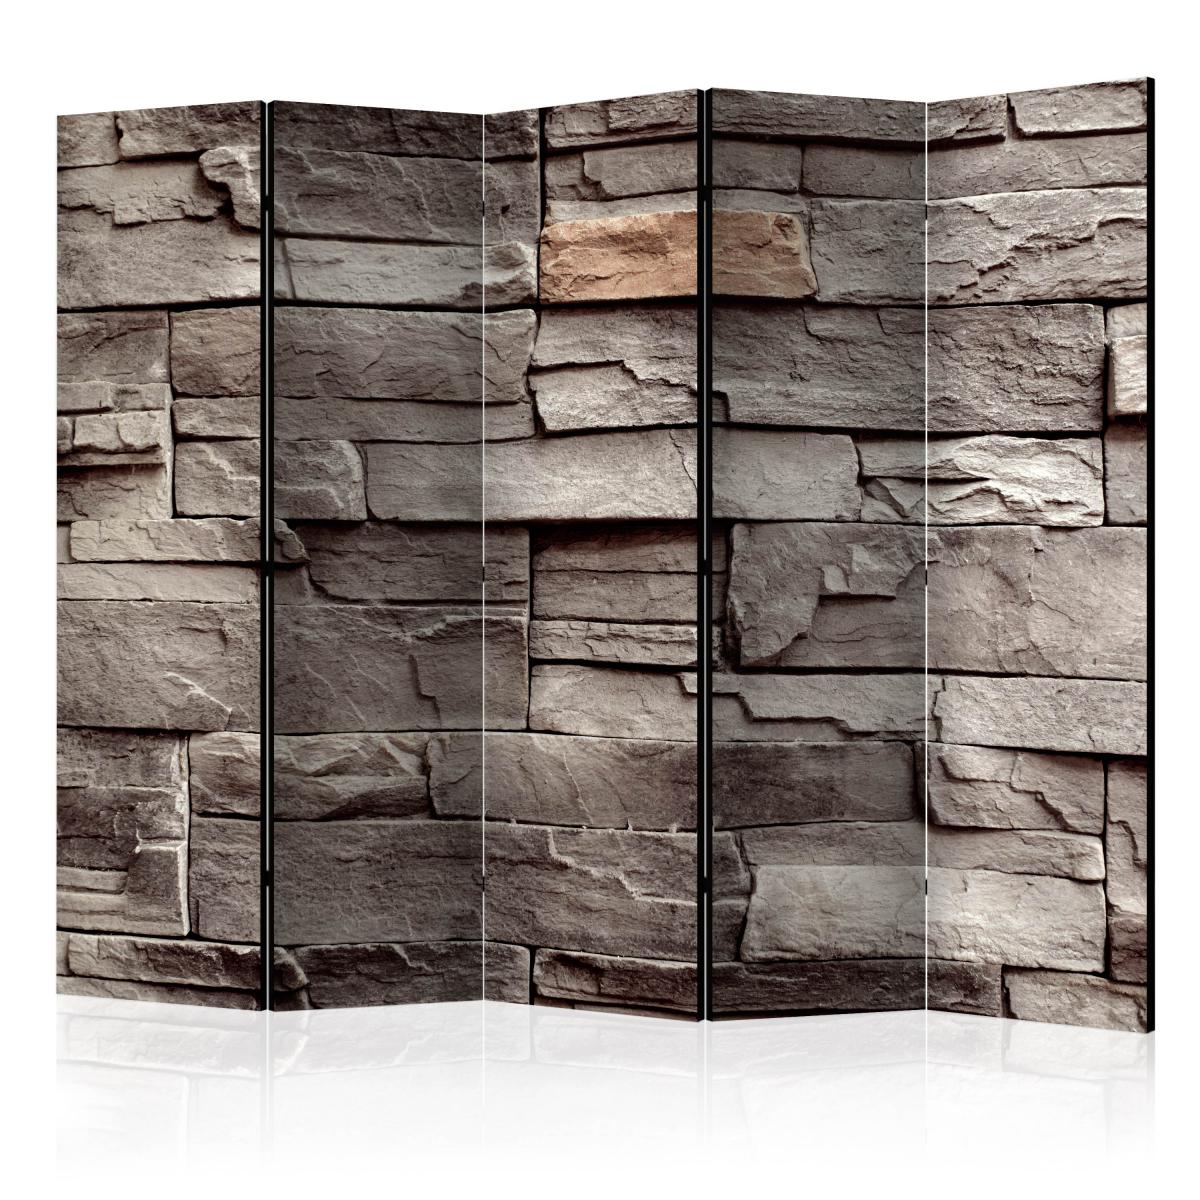 Bimago - Paravent 5 volets - Wall of Silence II [Room Dividers] - Décoration, image, art | 225x172 cm | XL - Grand Format | - Cloisons